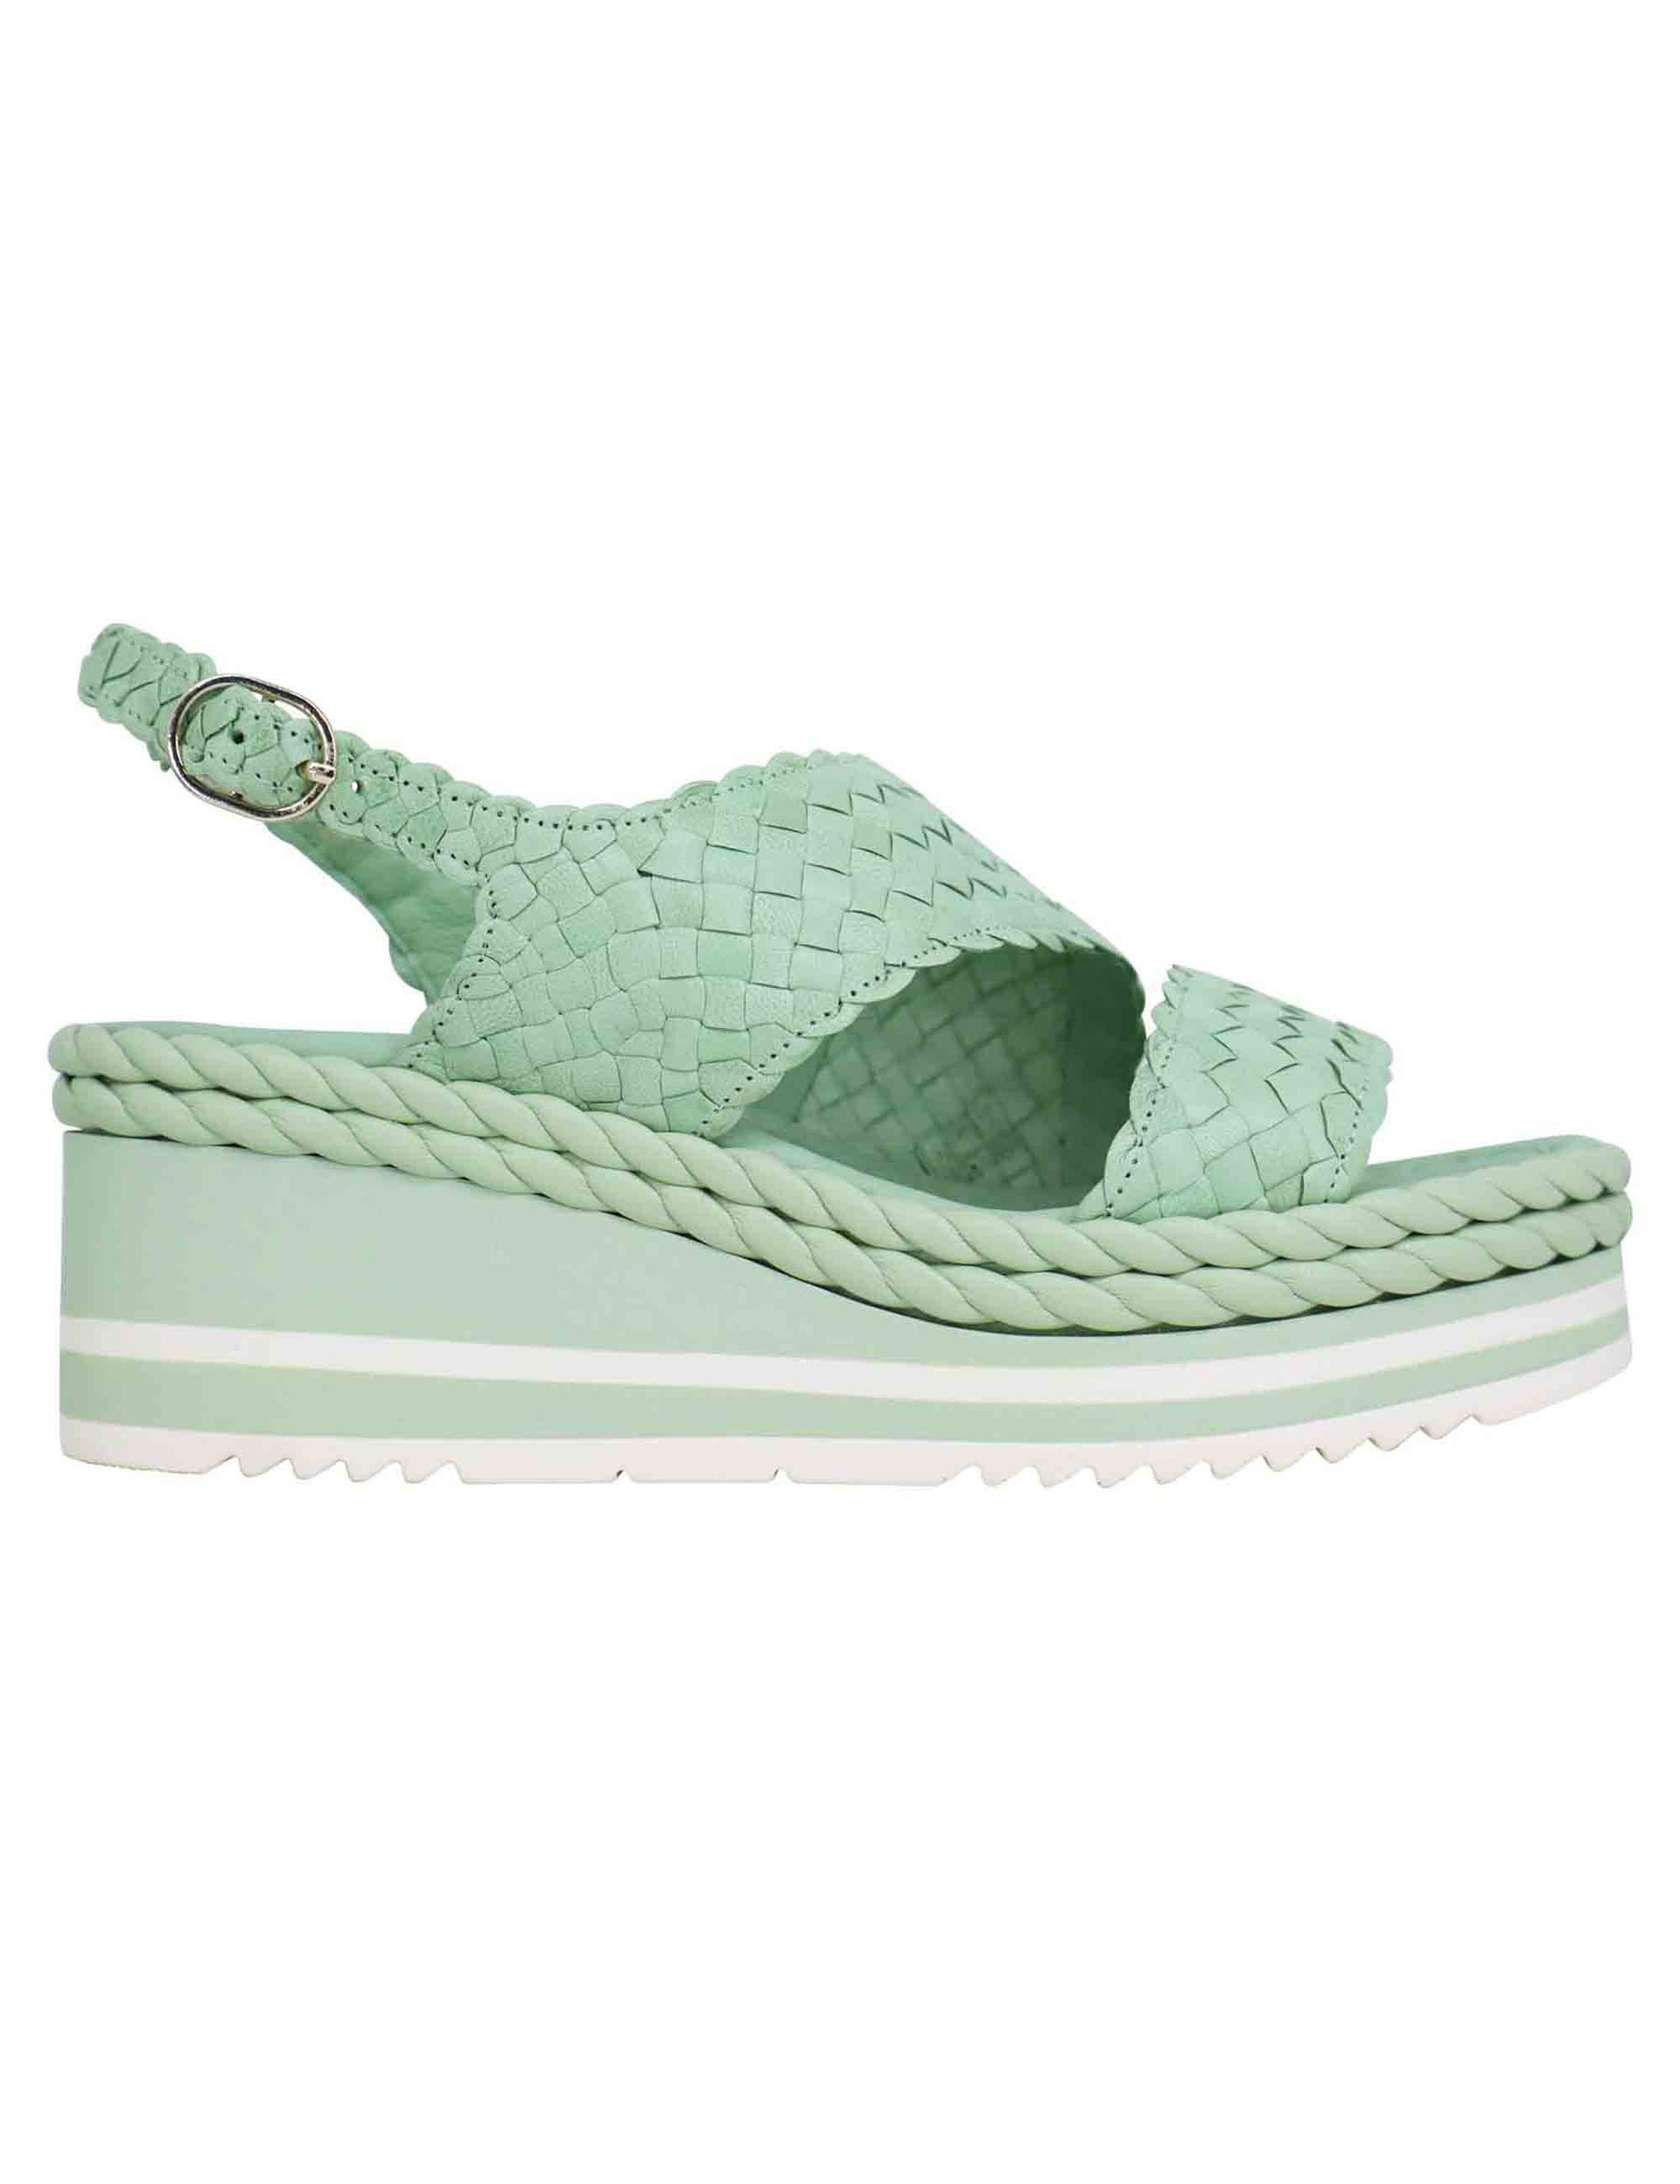 Women's sandals in green woven leather with rubber wedge